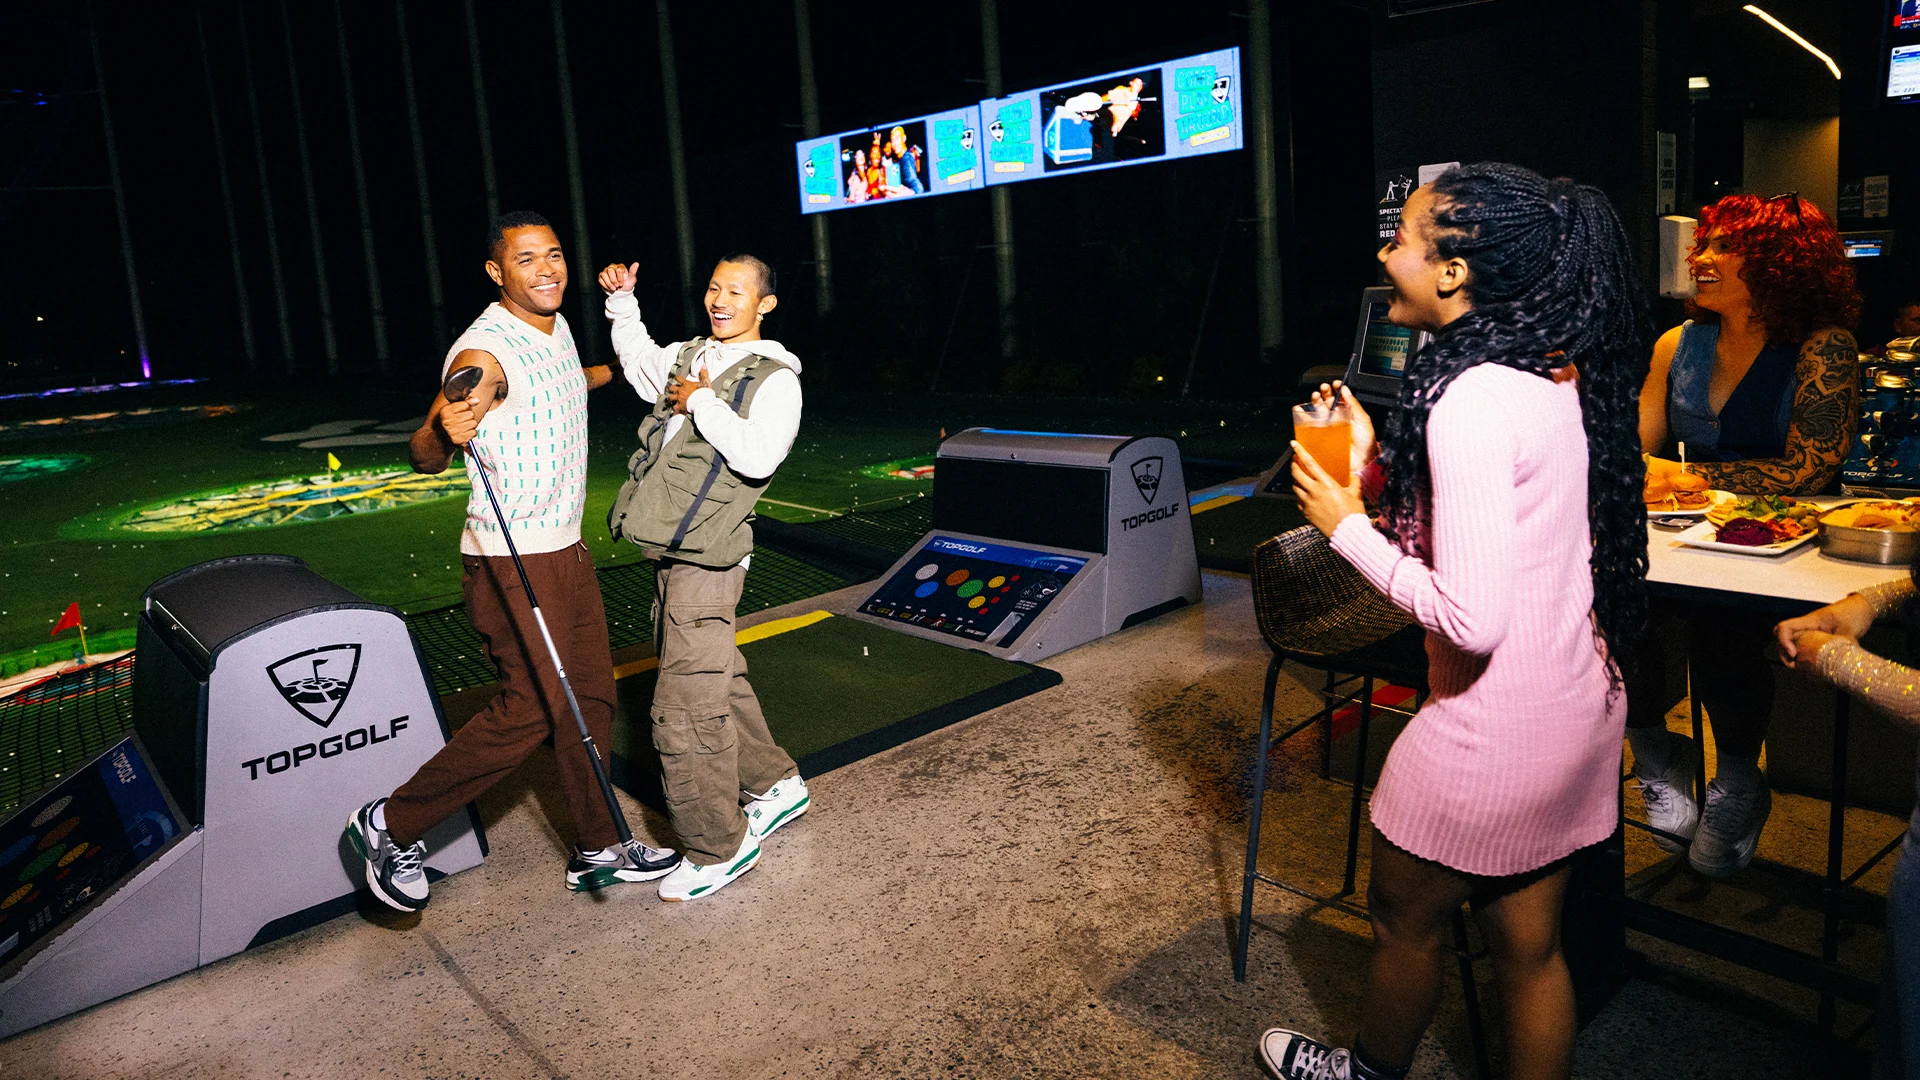 A group of people playing a game of golf at night during a Topgolf event.